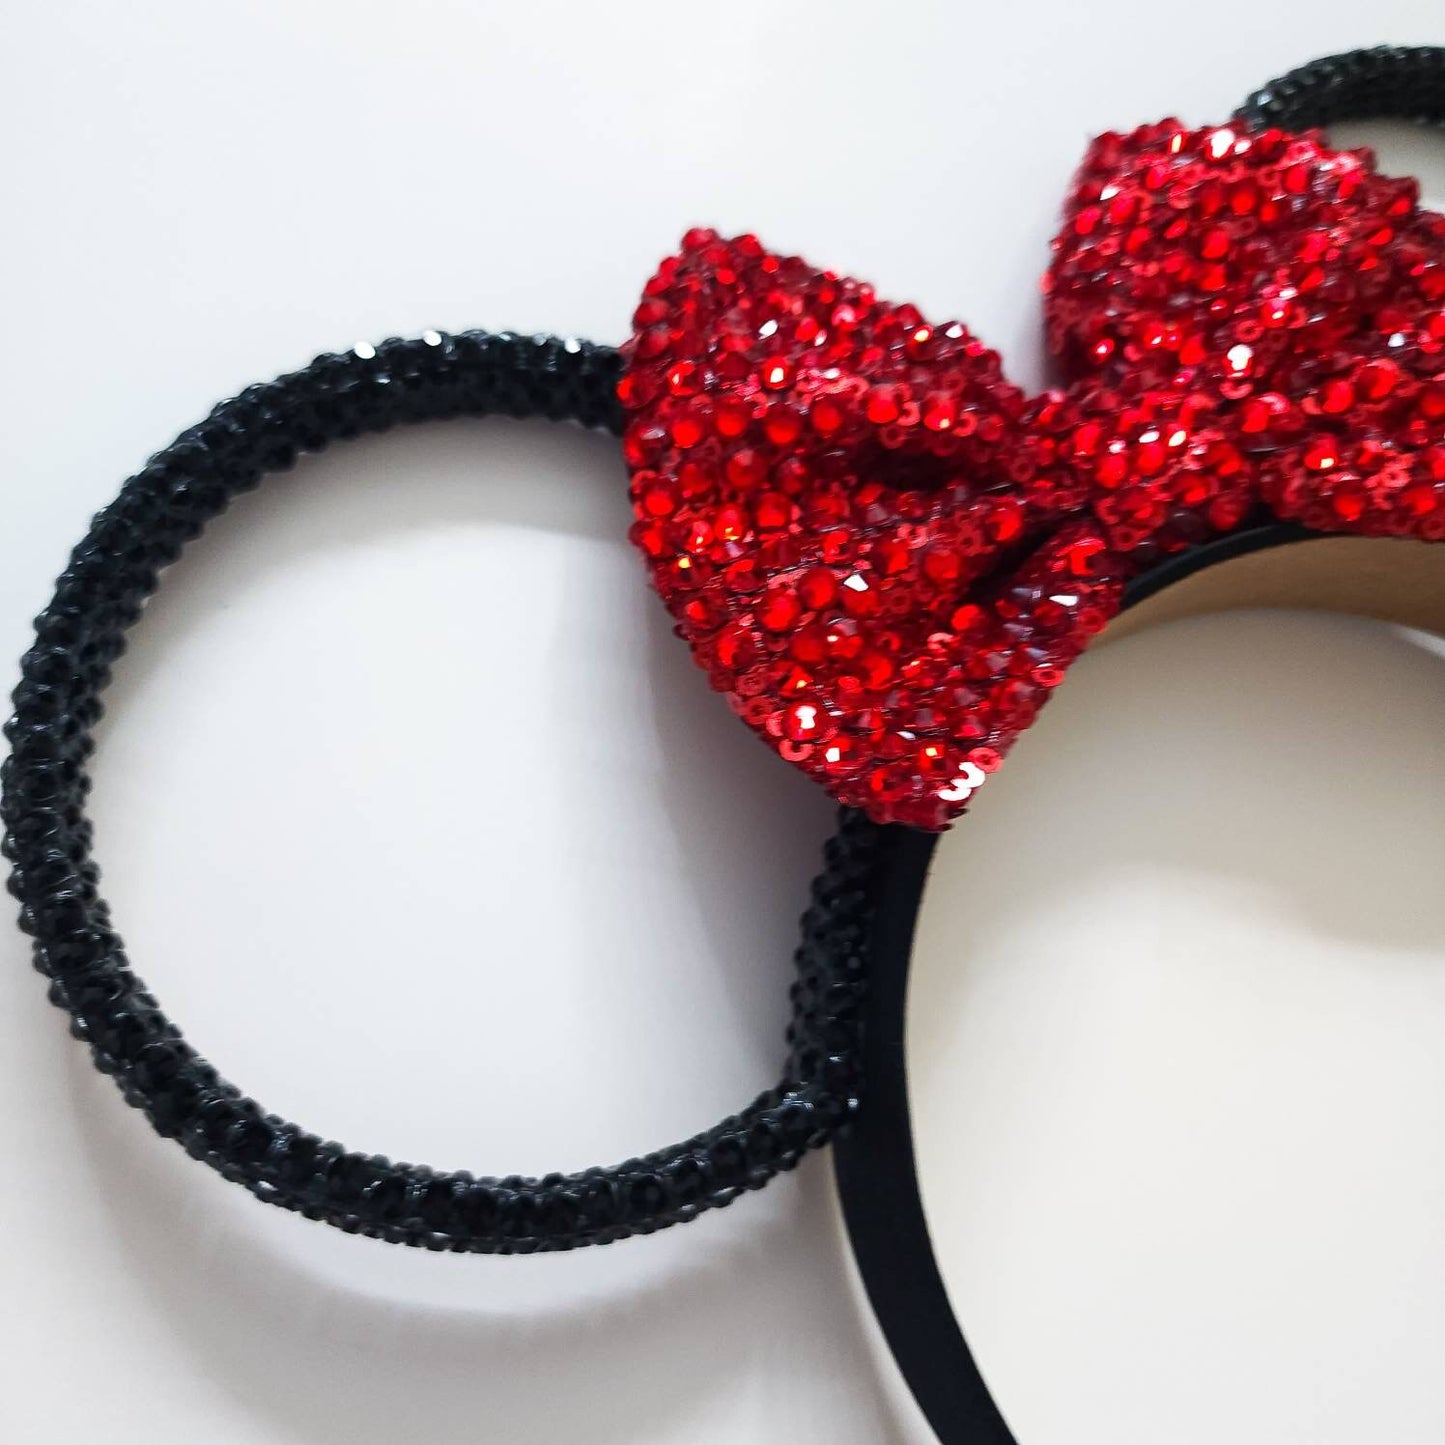 Magic Mountain ears ORIGINAL design-Black Rhinestone rings with red rhinestone sequin bow 3D Mouse Ears all sides covered